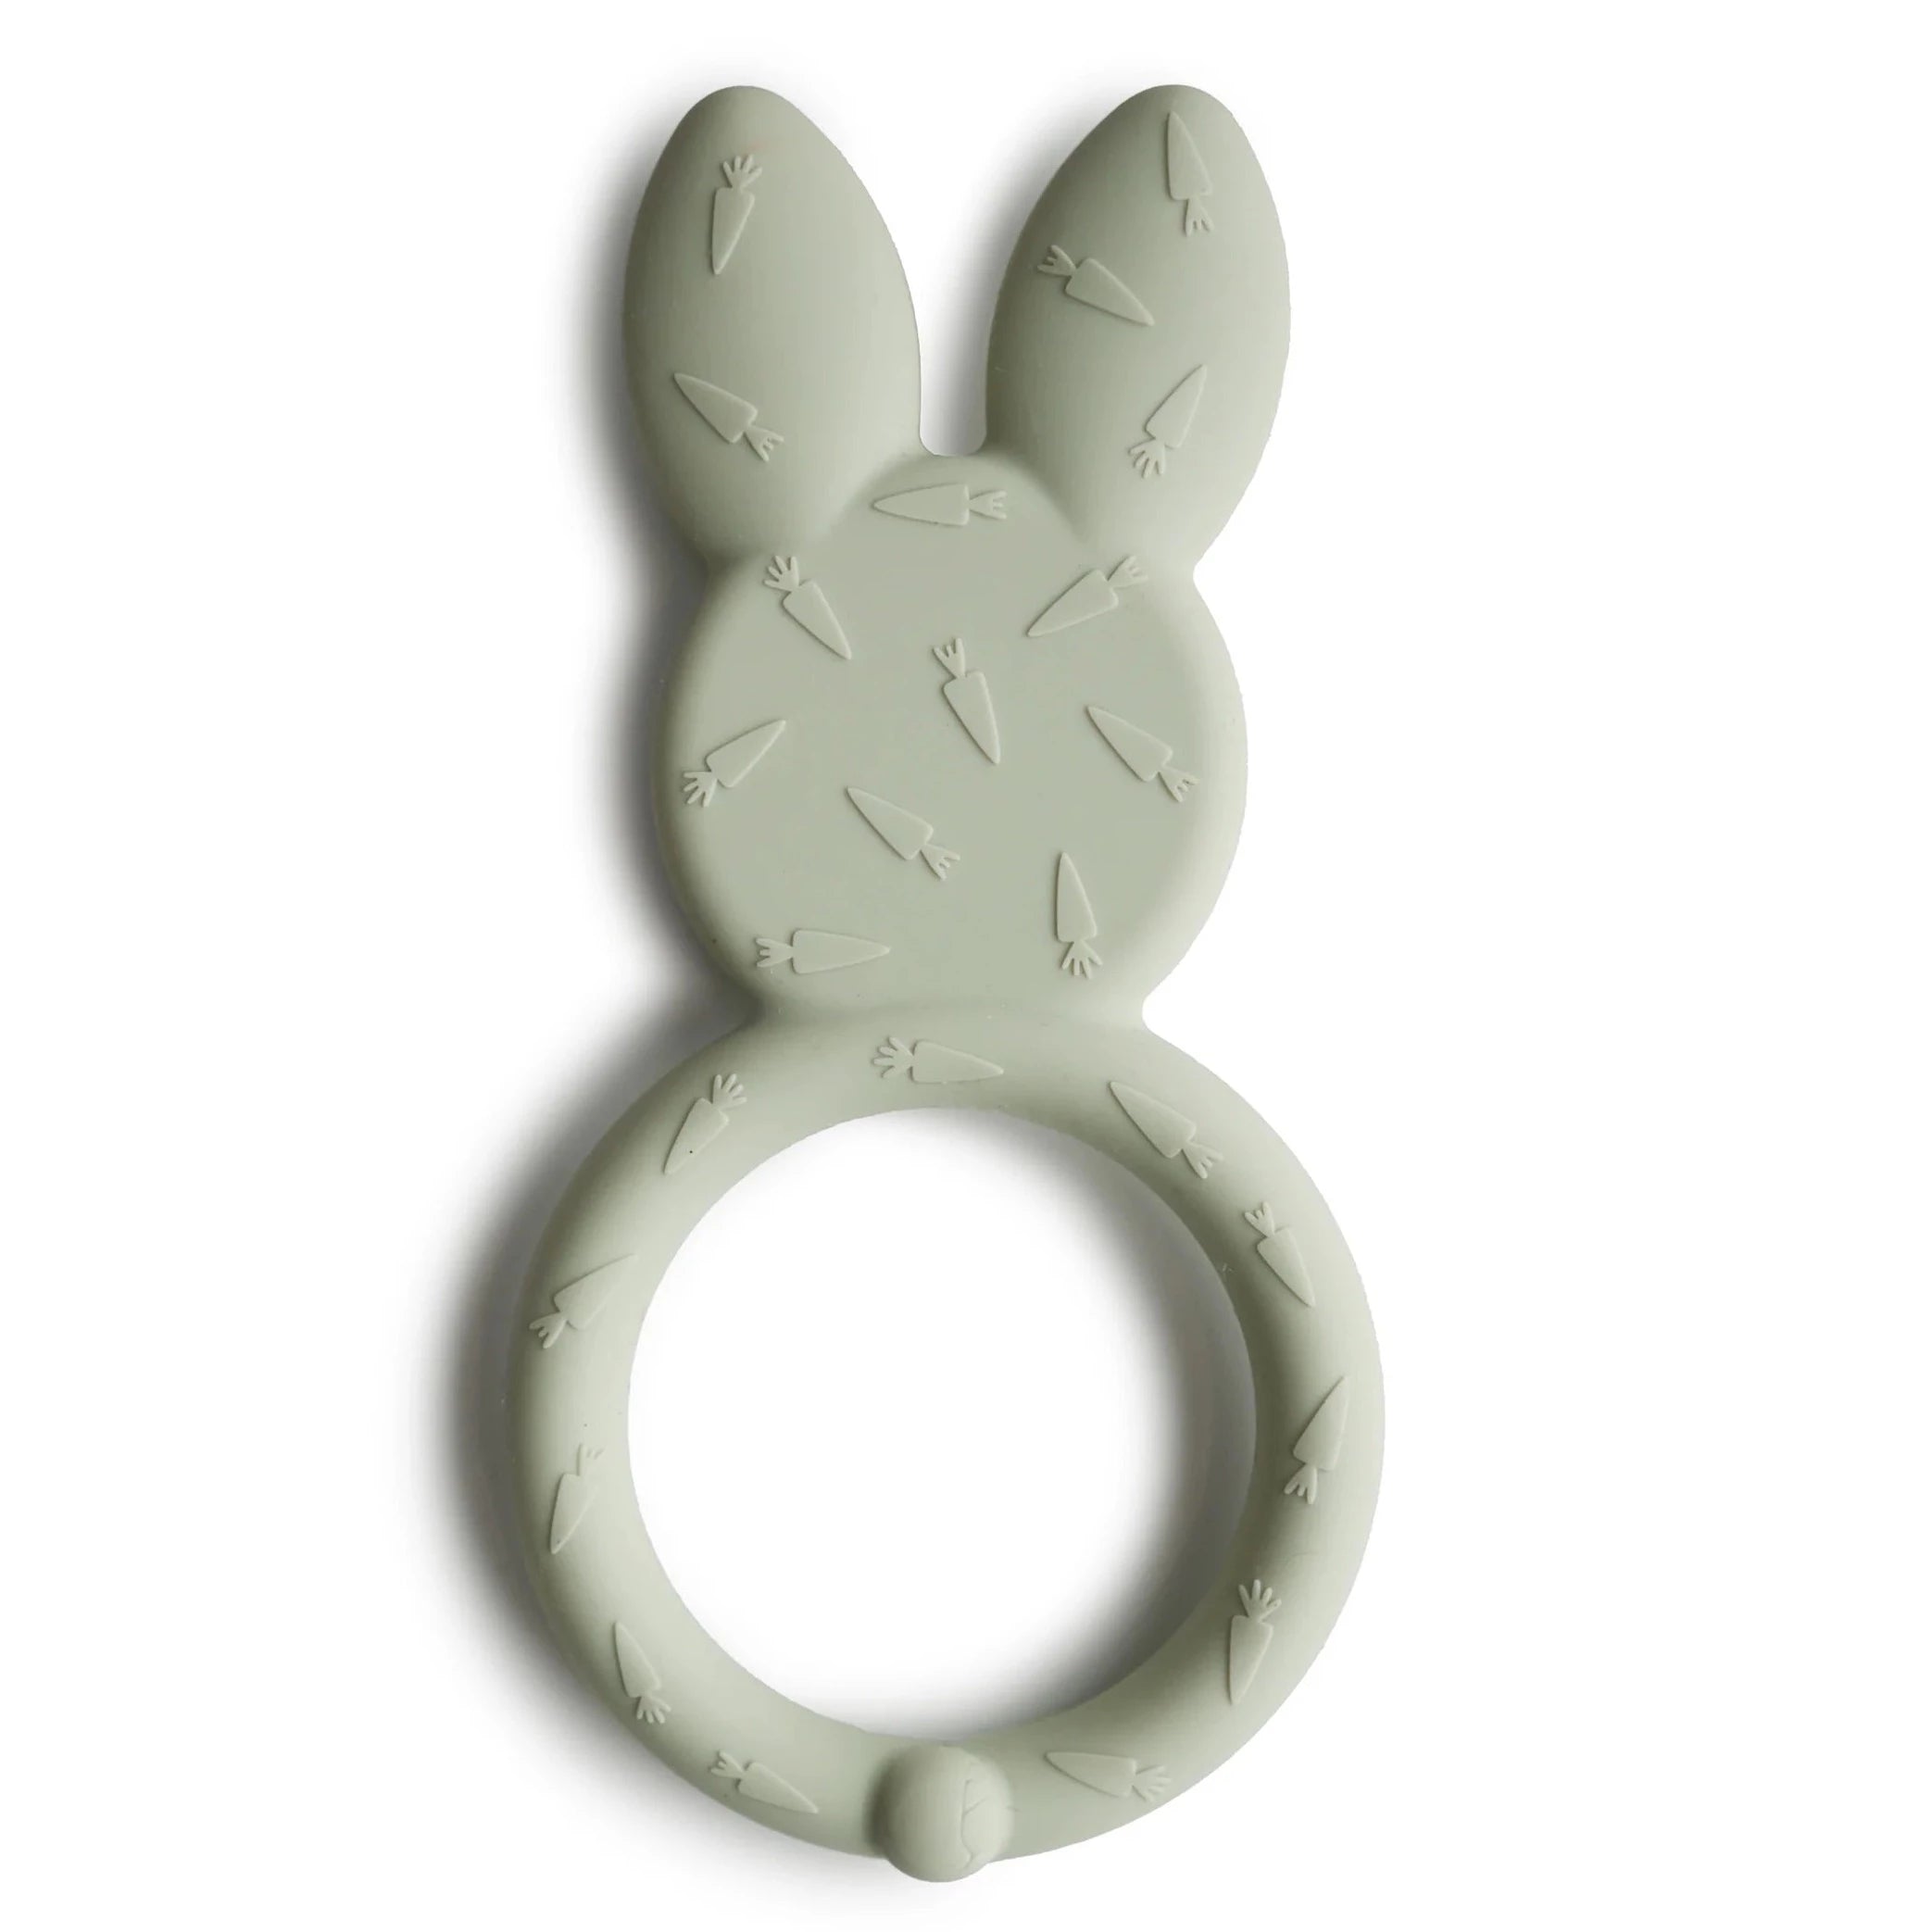 back of bunny shaped teether